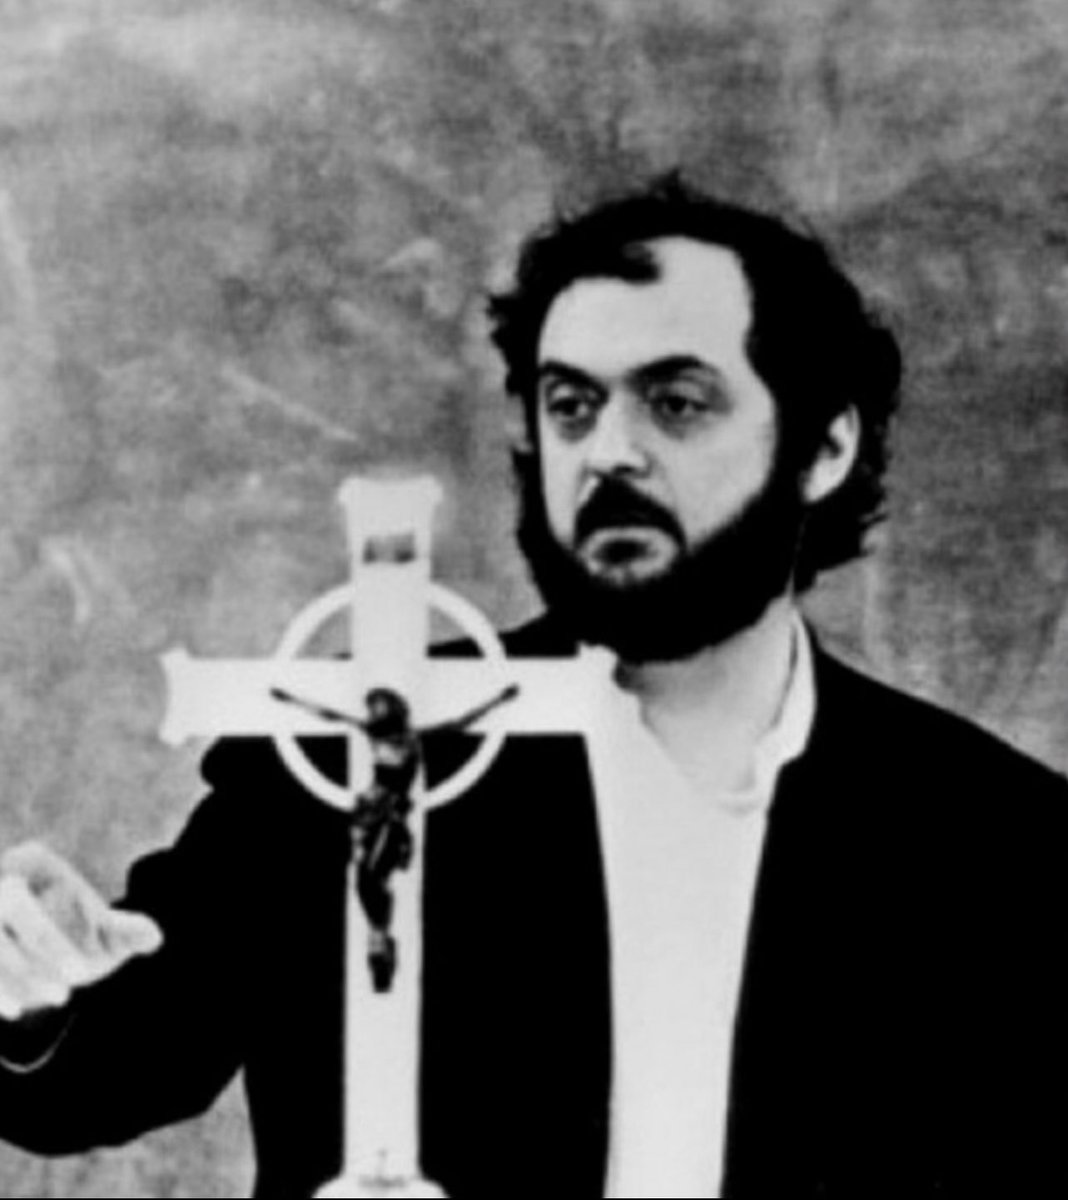 Stanley Kubrick was a CHRISTIAN